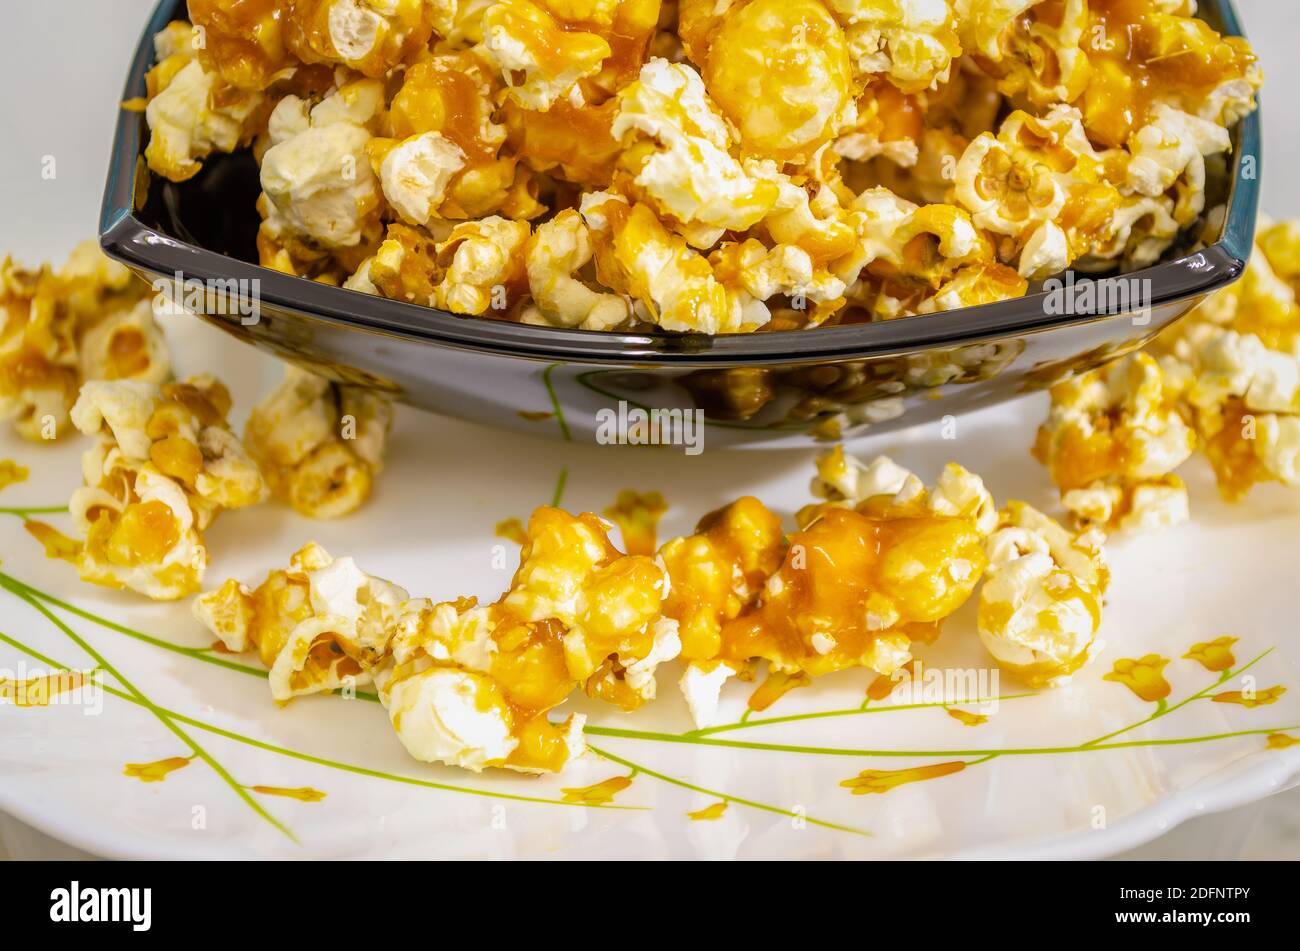 Closeup of sweet and Crunchy Caramel Popcorn in a bowl and spilled over to a plate beneath Stock Photo